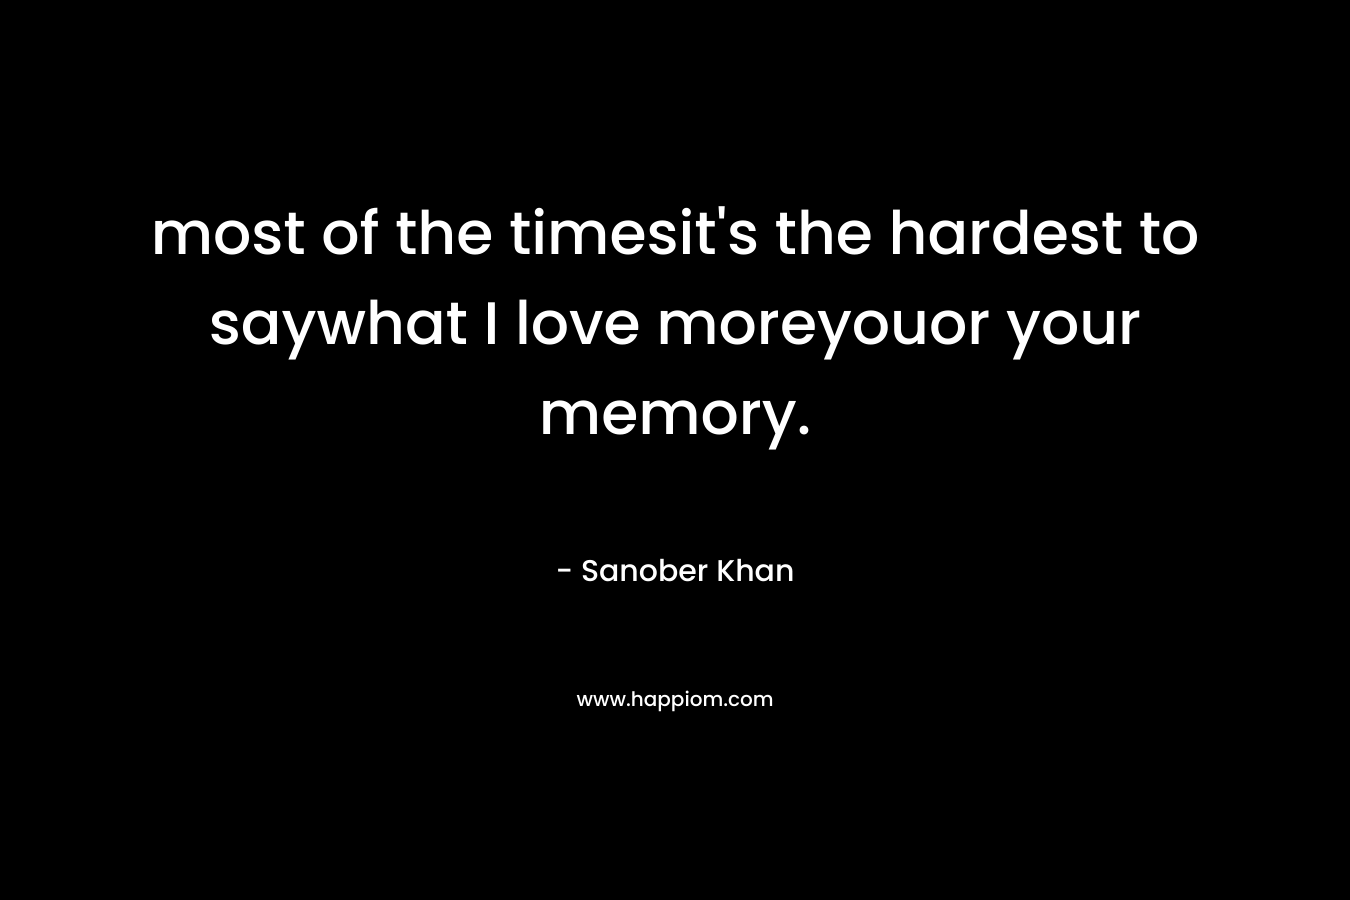 most of the timesit's the hardest to saywhat I love moreyouor your memory.